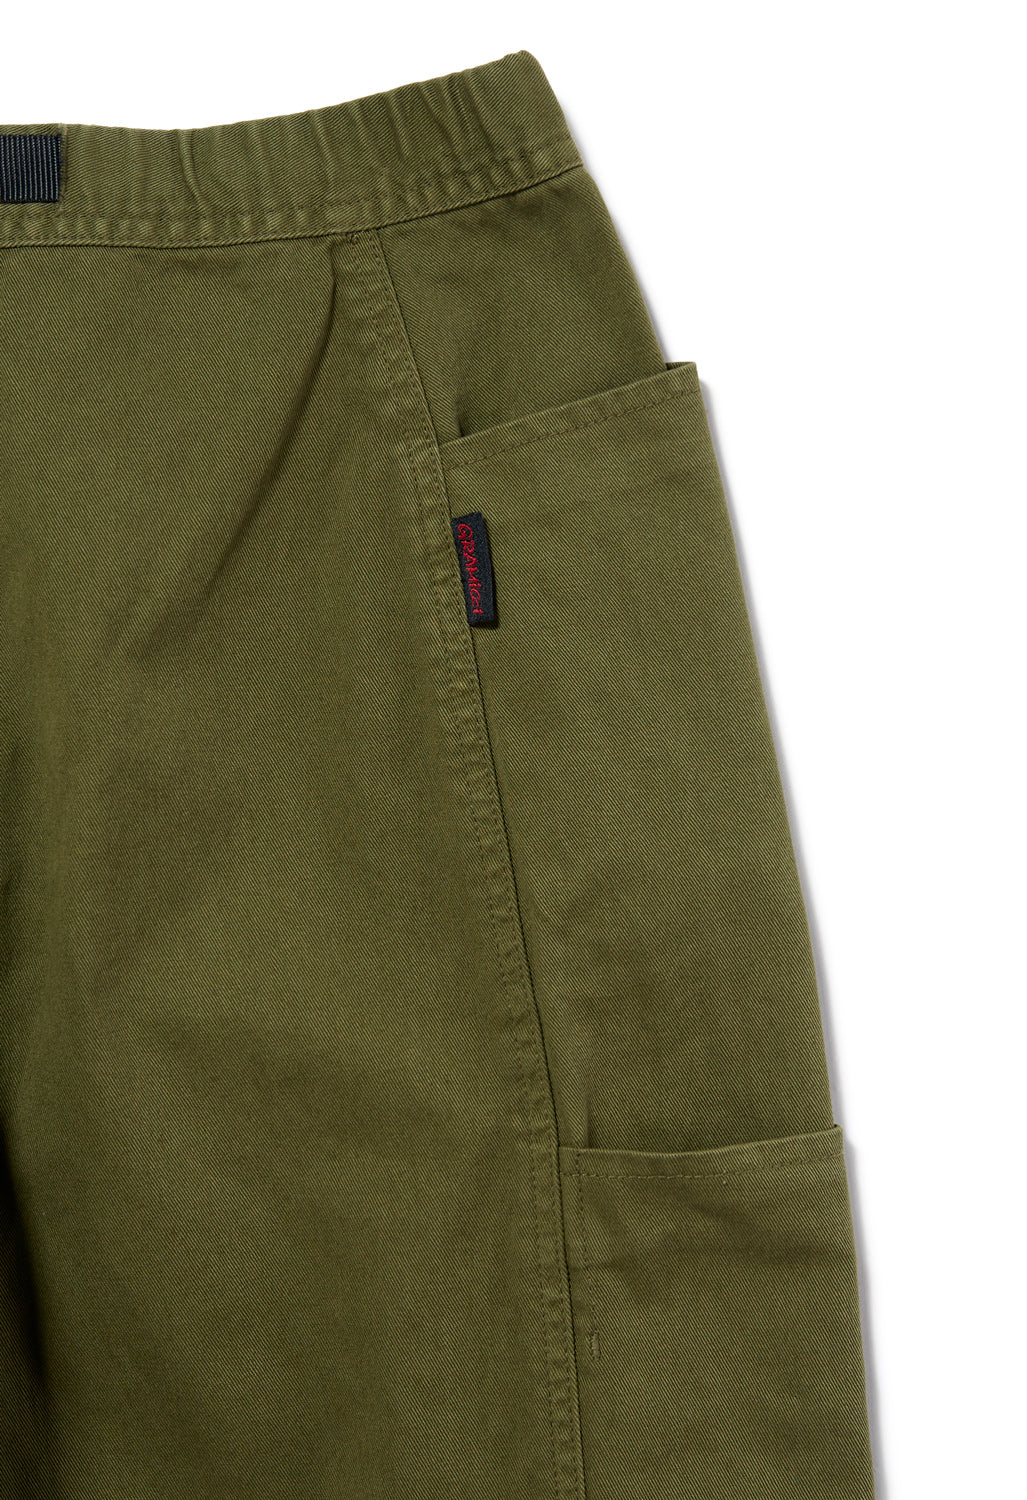 Gramicci Women's Voyager Pants - Olive